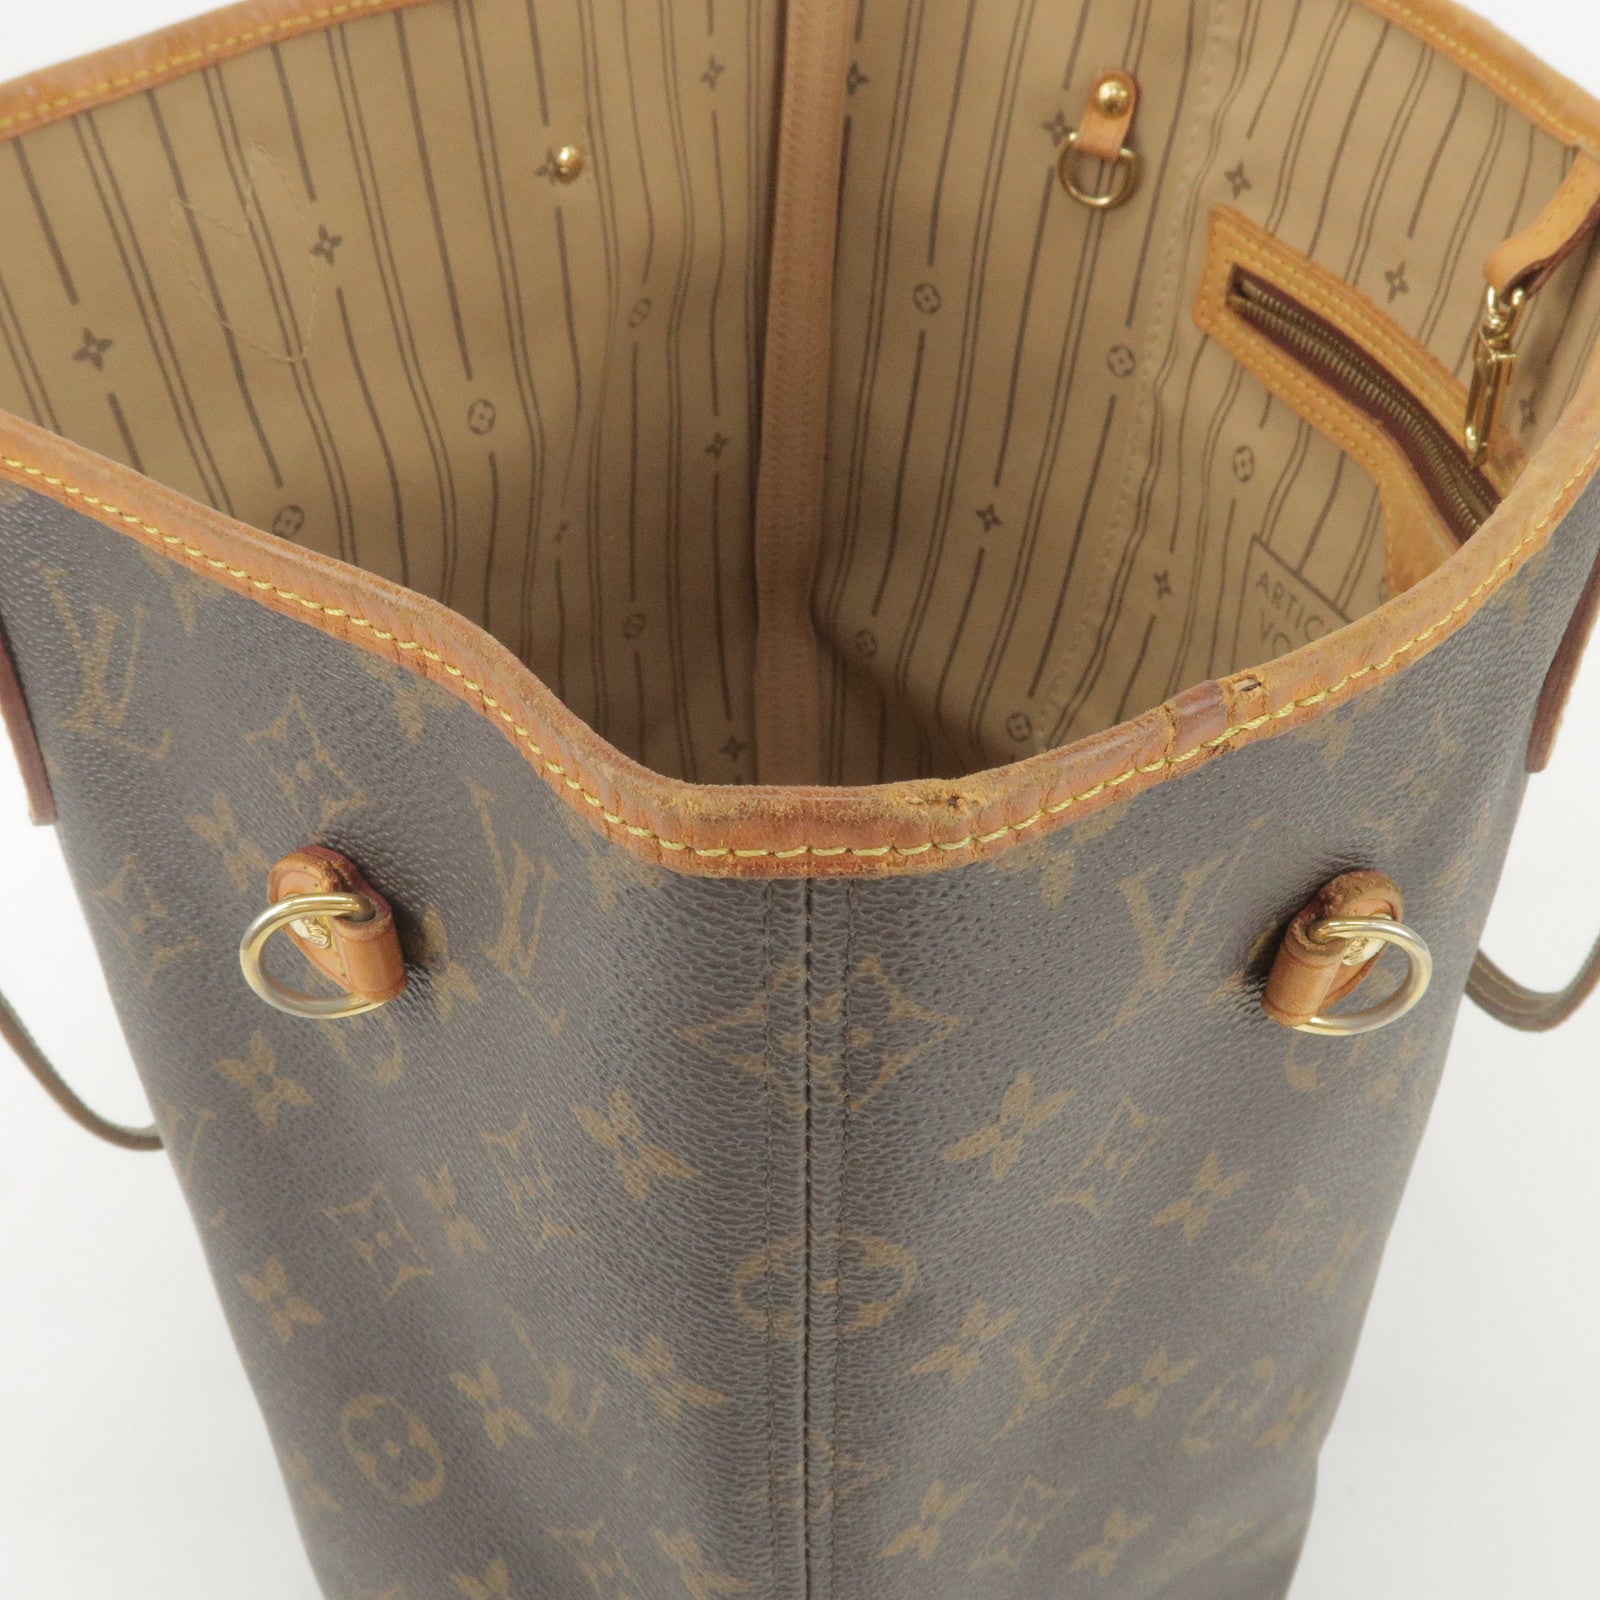 Bag - Monogram - Bag - 40156 – dct - Neverfull - Louis Vuitton Carryall  handbag in monogram canvas and natural leather - ep_vintage luxury Store -  Louis - Tote - Hand - Vuitton - MM